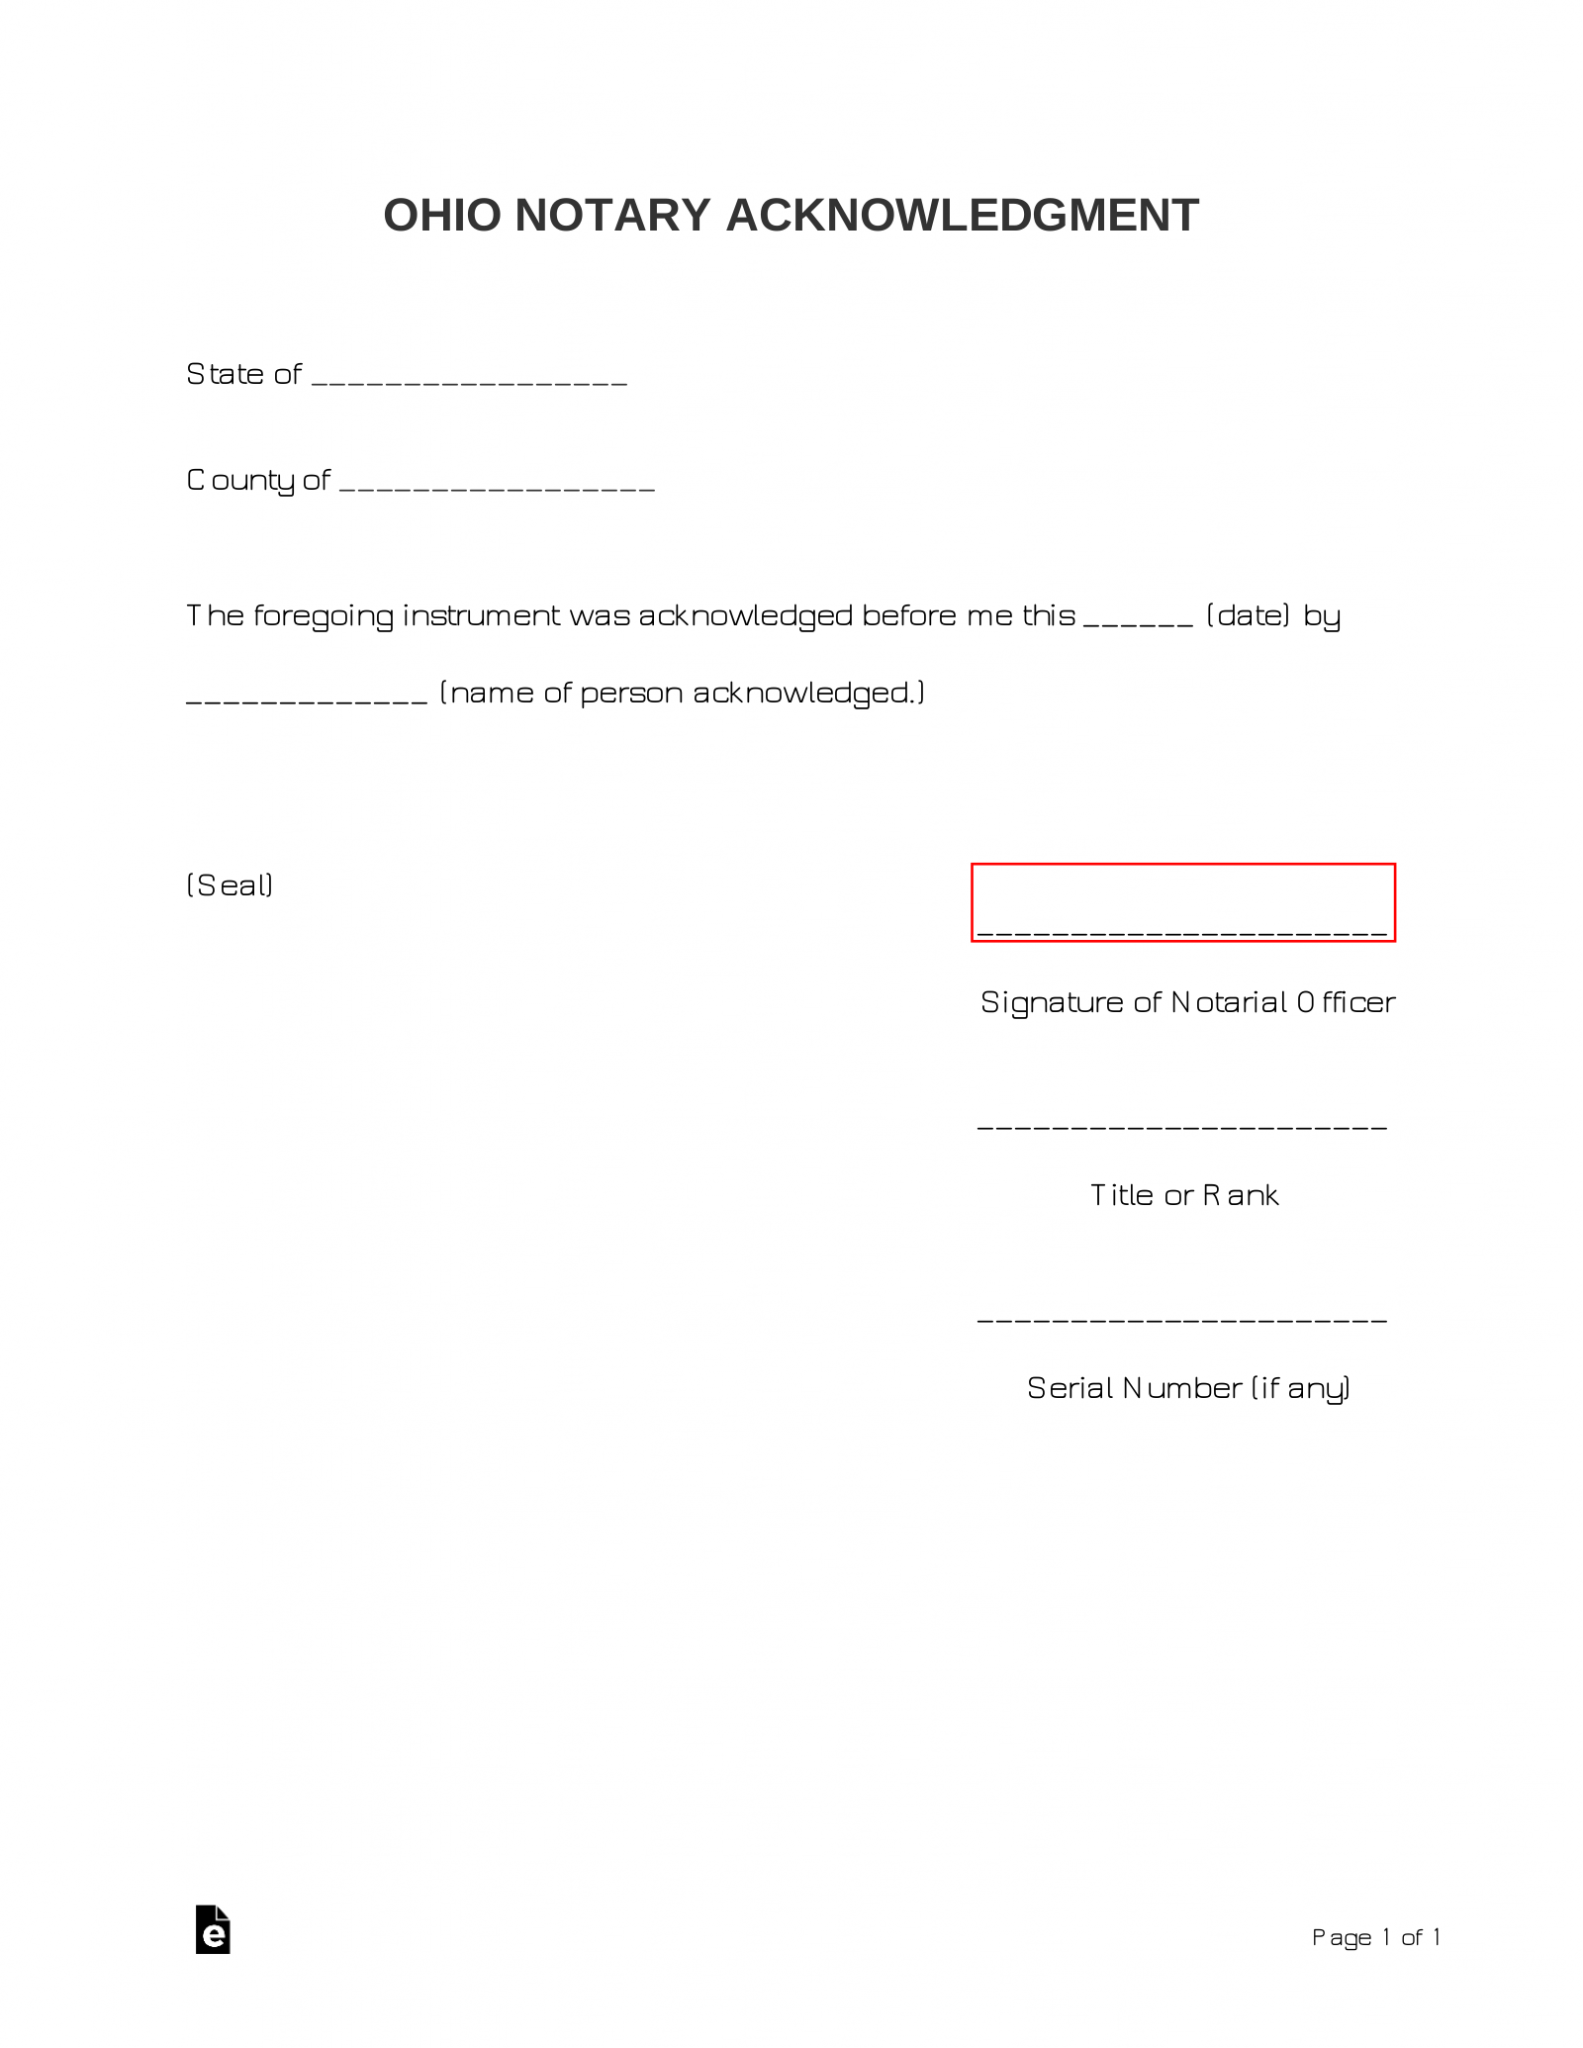 notary-acknowledgement-ohio-fill-out-and-sign-printable-pdf-template